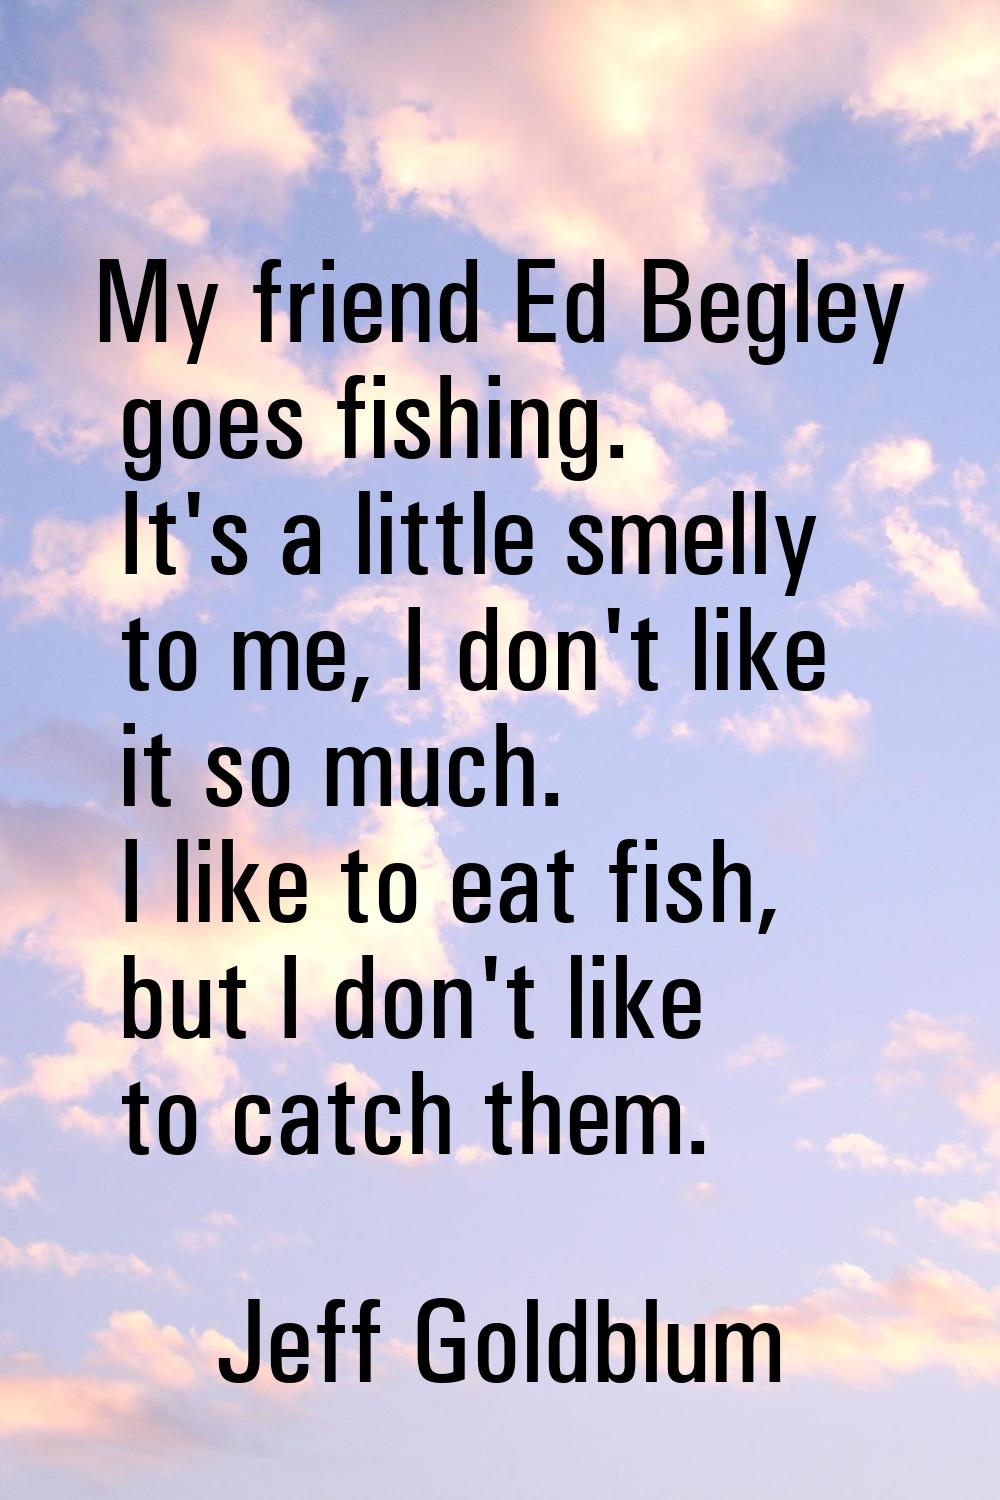 My friend Ed Begley goes fishing. It's a little smelly to me, I don't like it so much. I like to ea